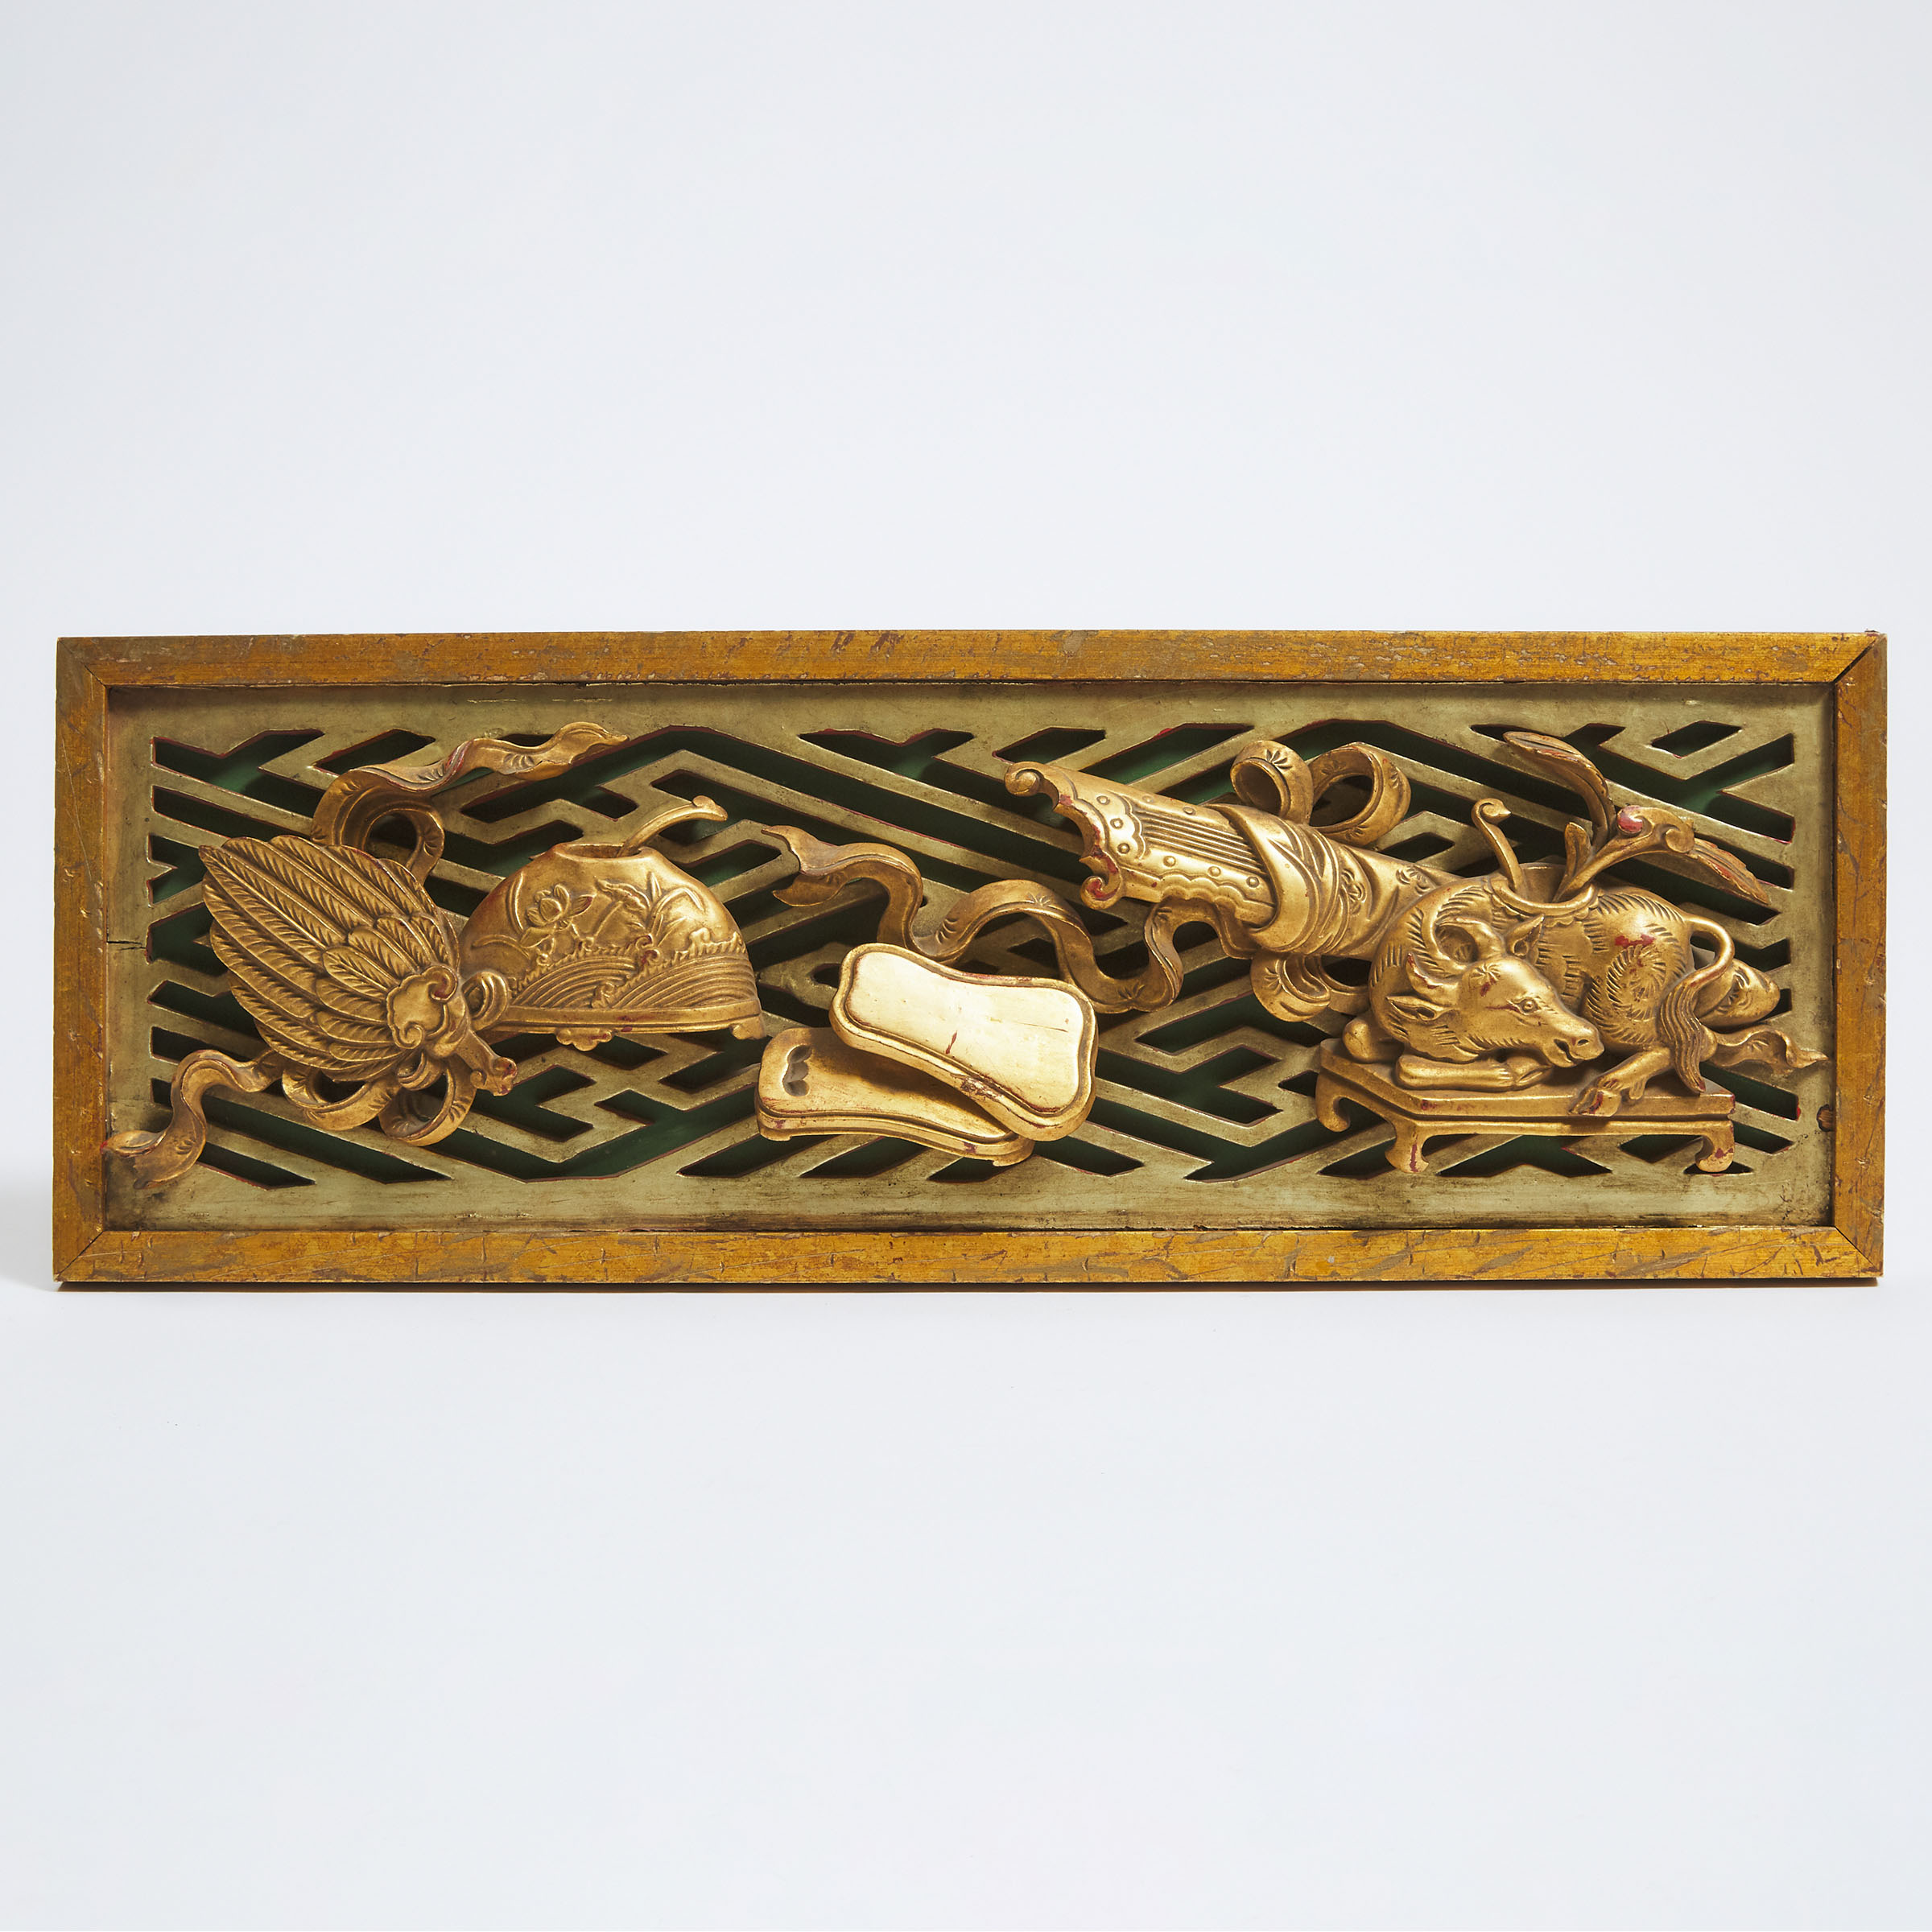 A Gilt Wood Carved 'Antiques' Panel, Late 19th/Early 20th Century